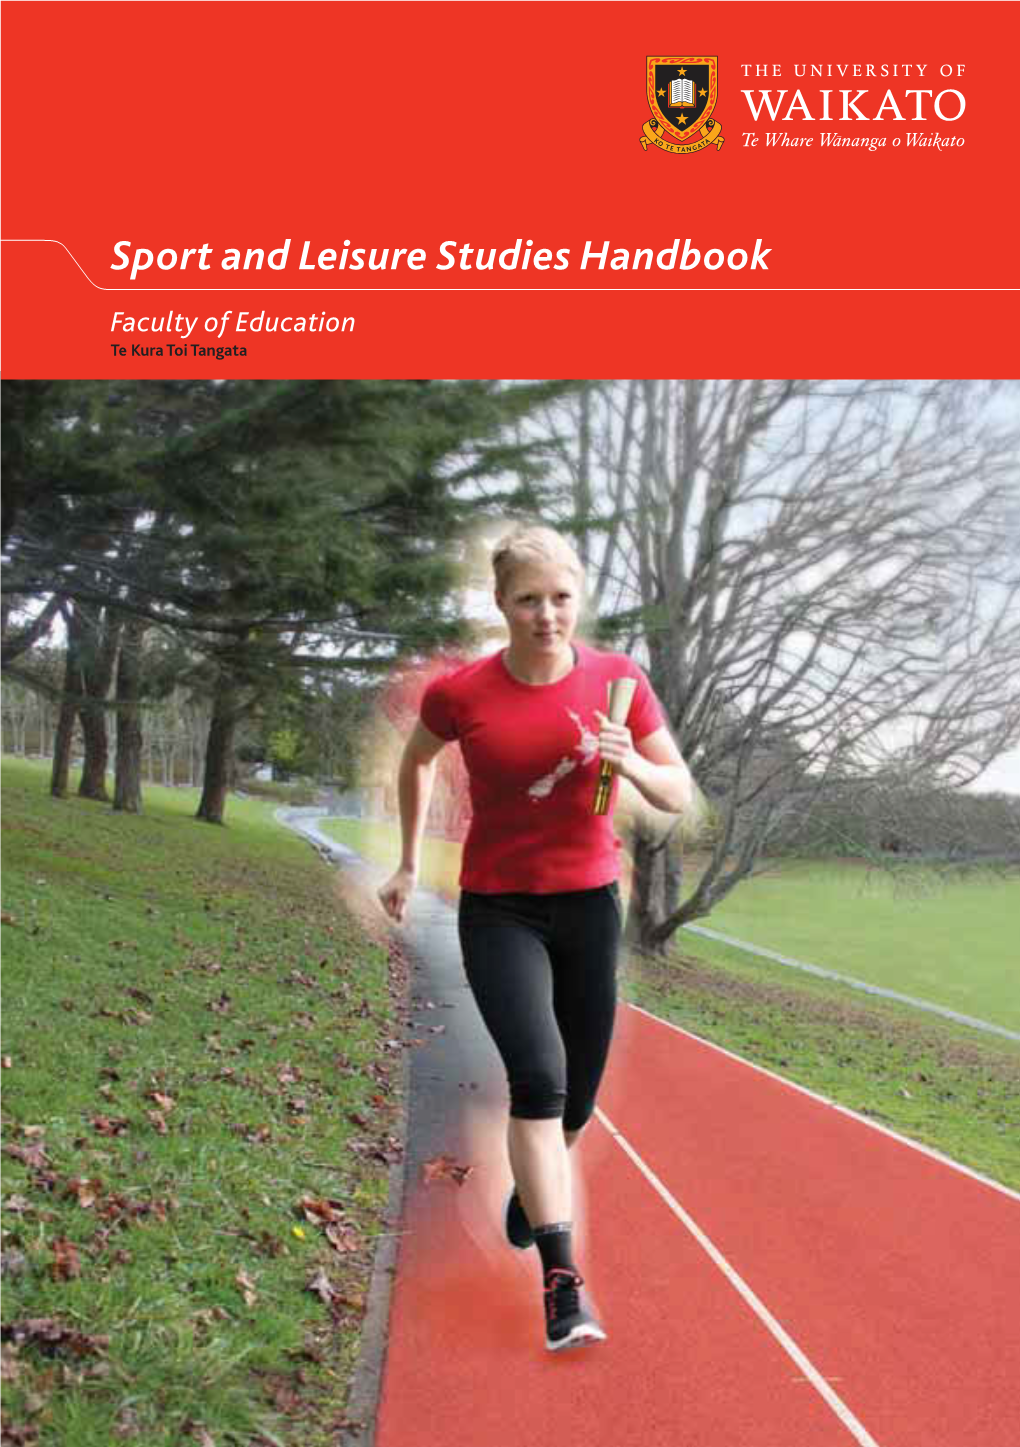 Sport and Leisure Studies Handbook the University of Waikato Celebrates 50 Years from the Vice-Chancellor